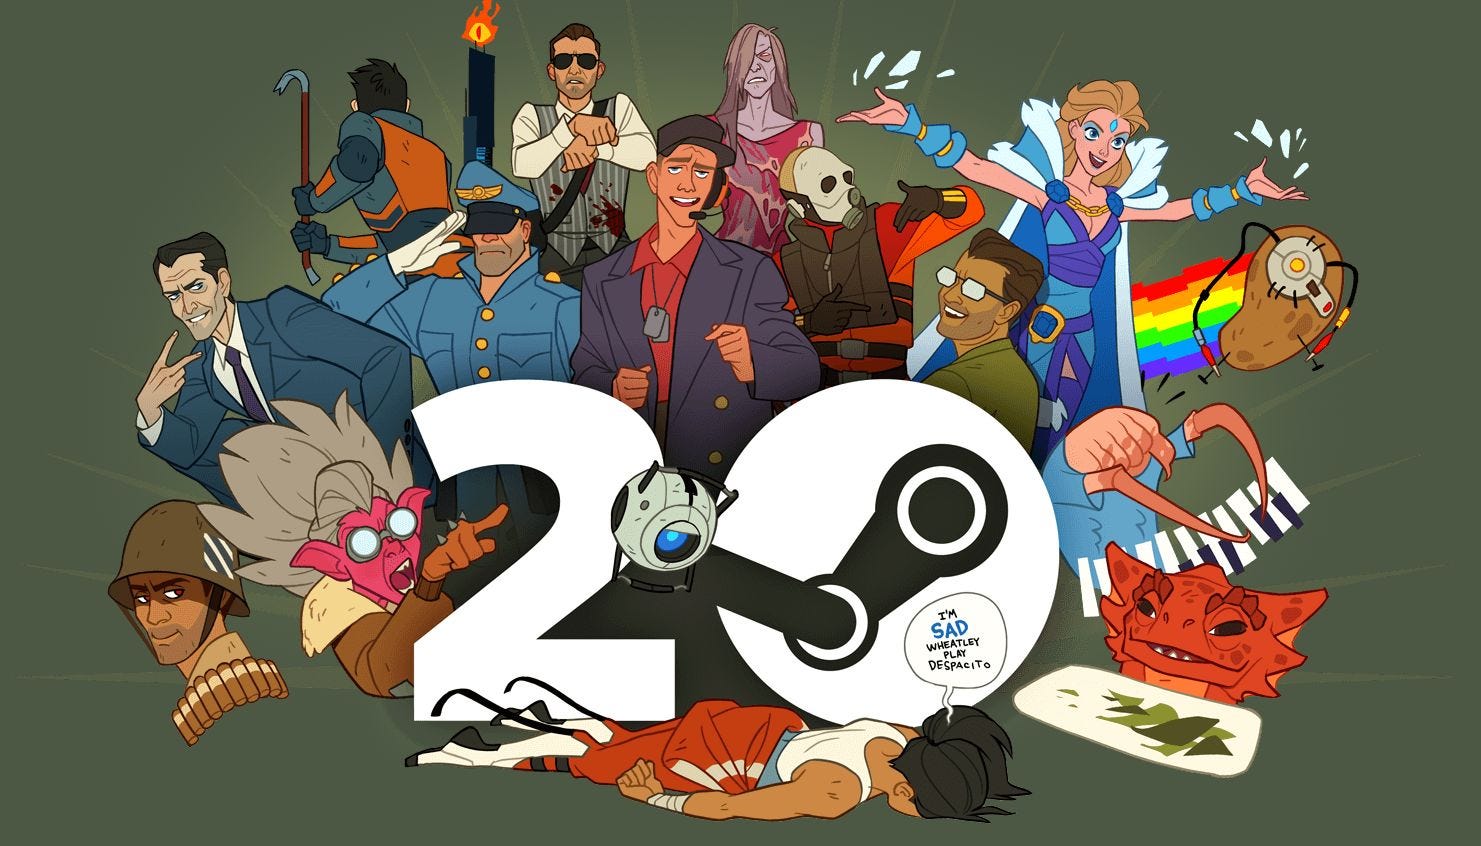 Steam celebrates its 20th anniversary in the only way it knows how: with a sale